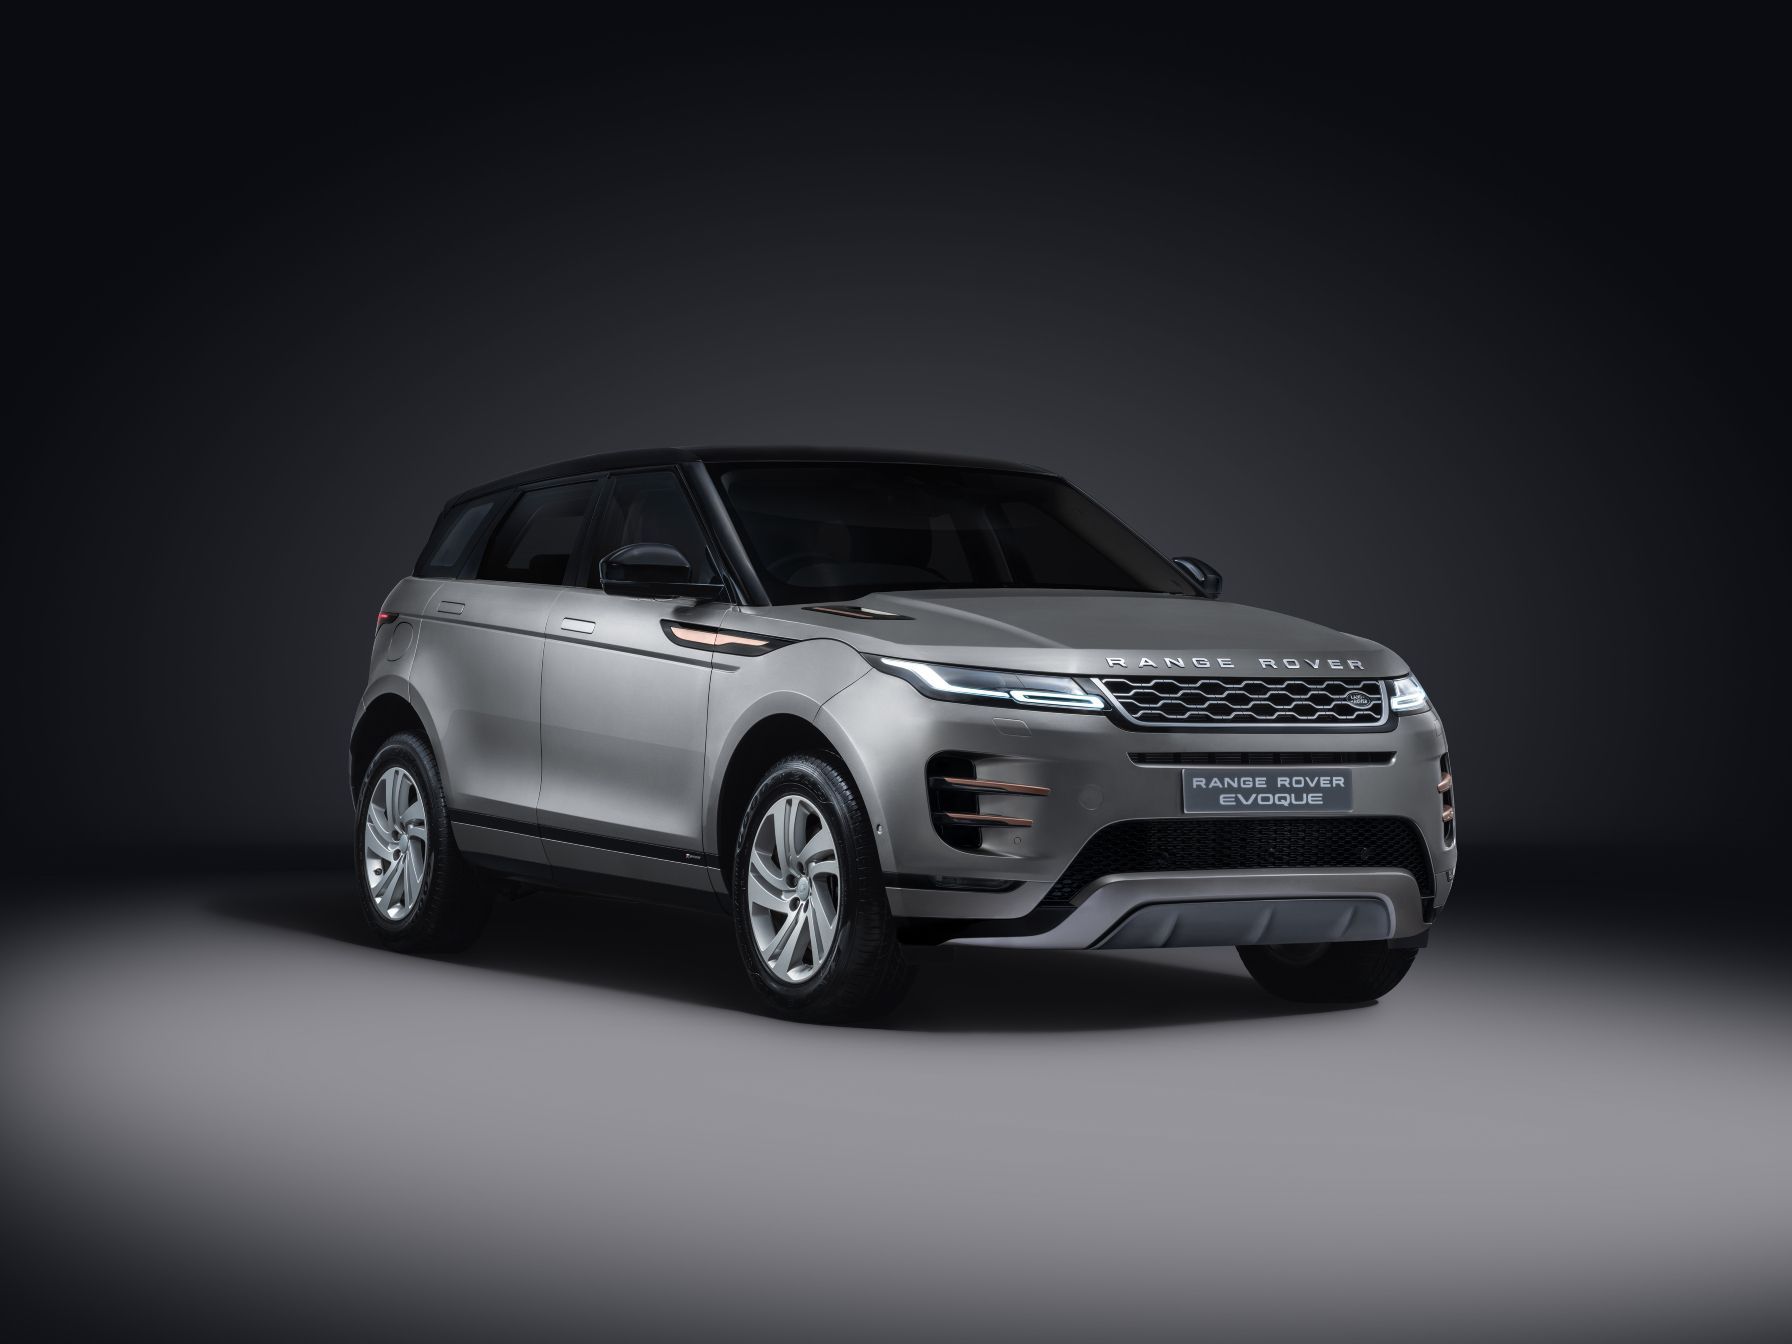 2021 Range Rover Evoque Launched In India At Rs 64.12 Lakh - ZigWheels